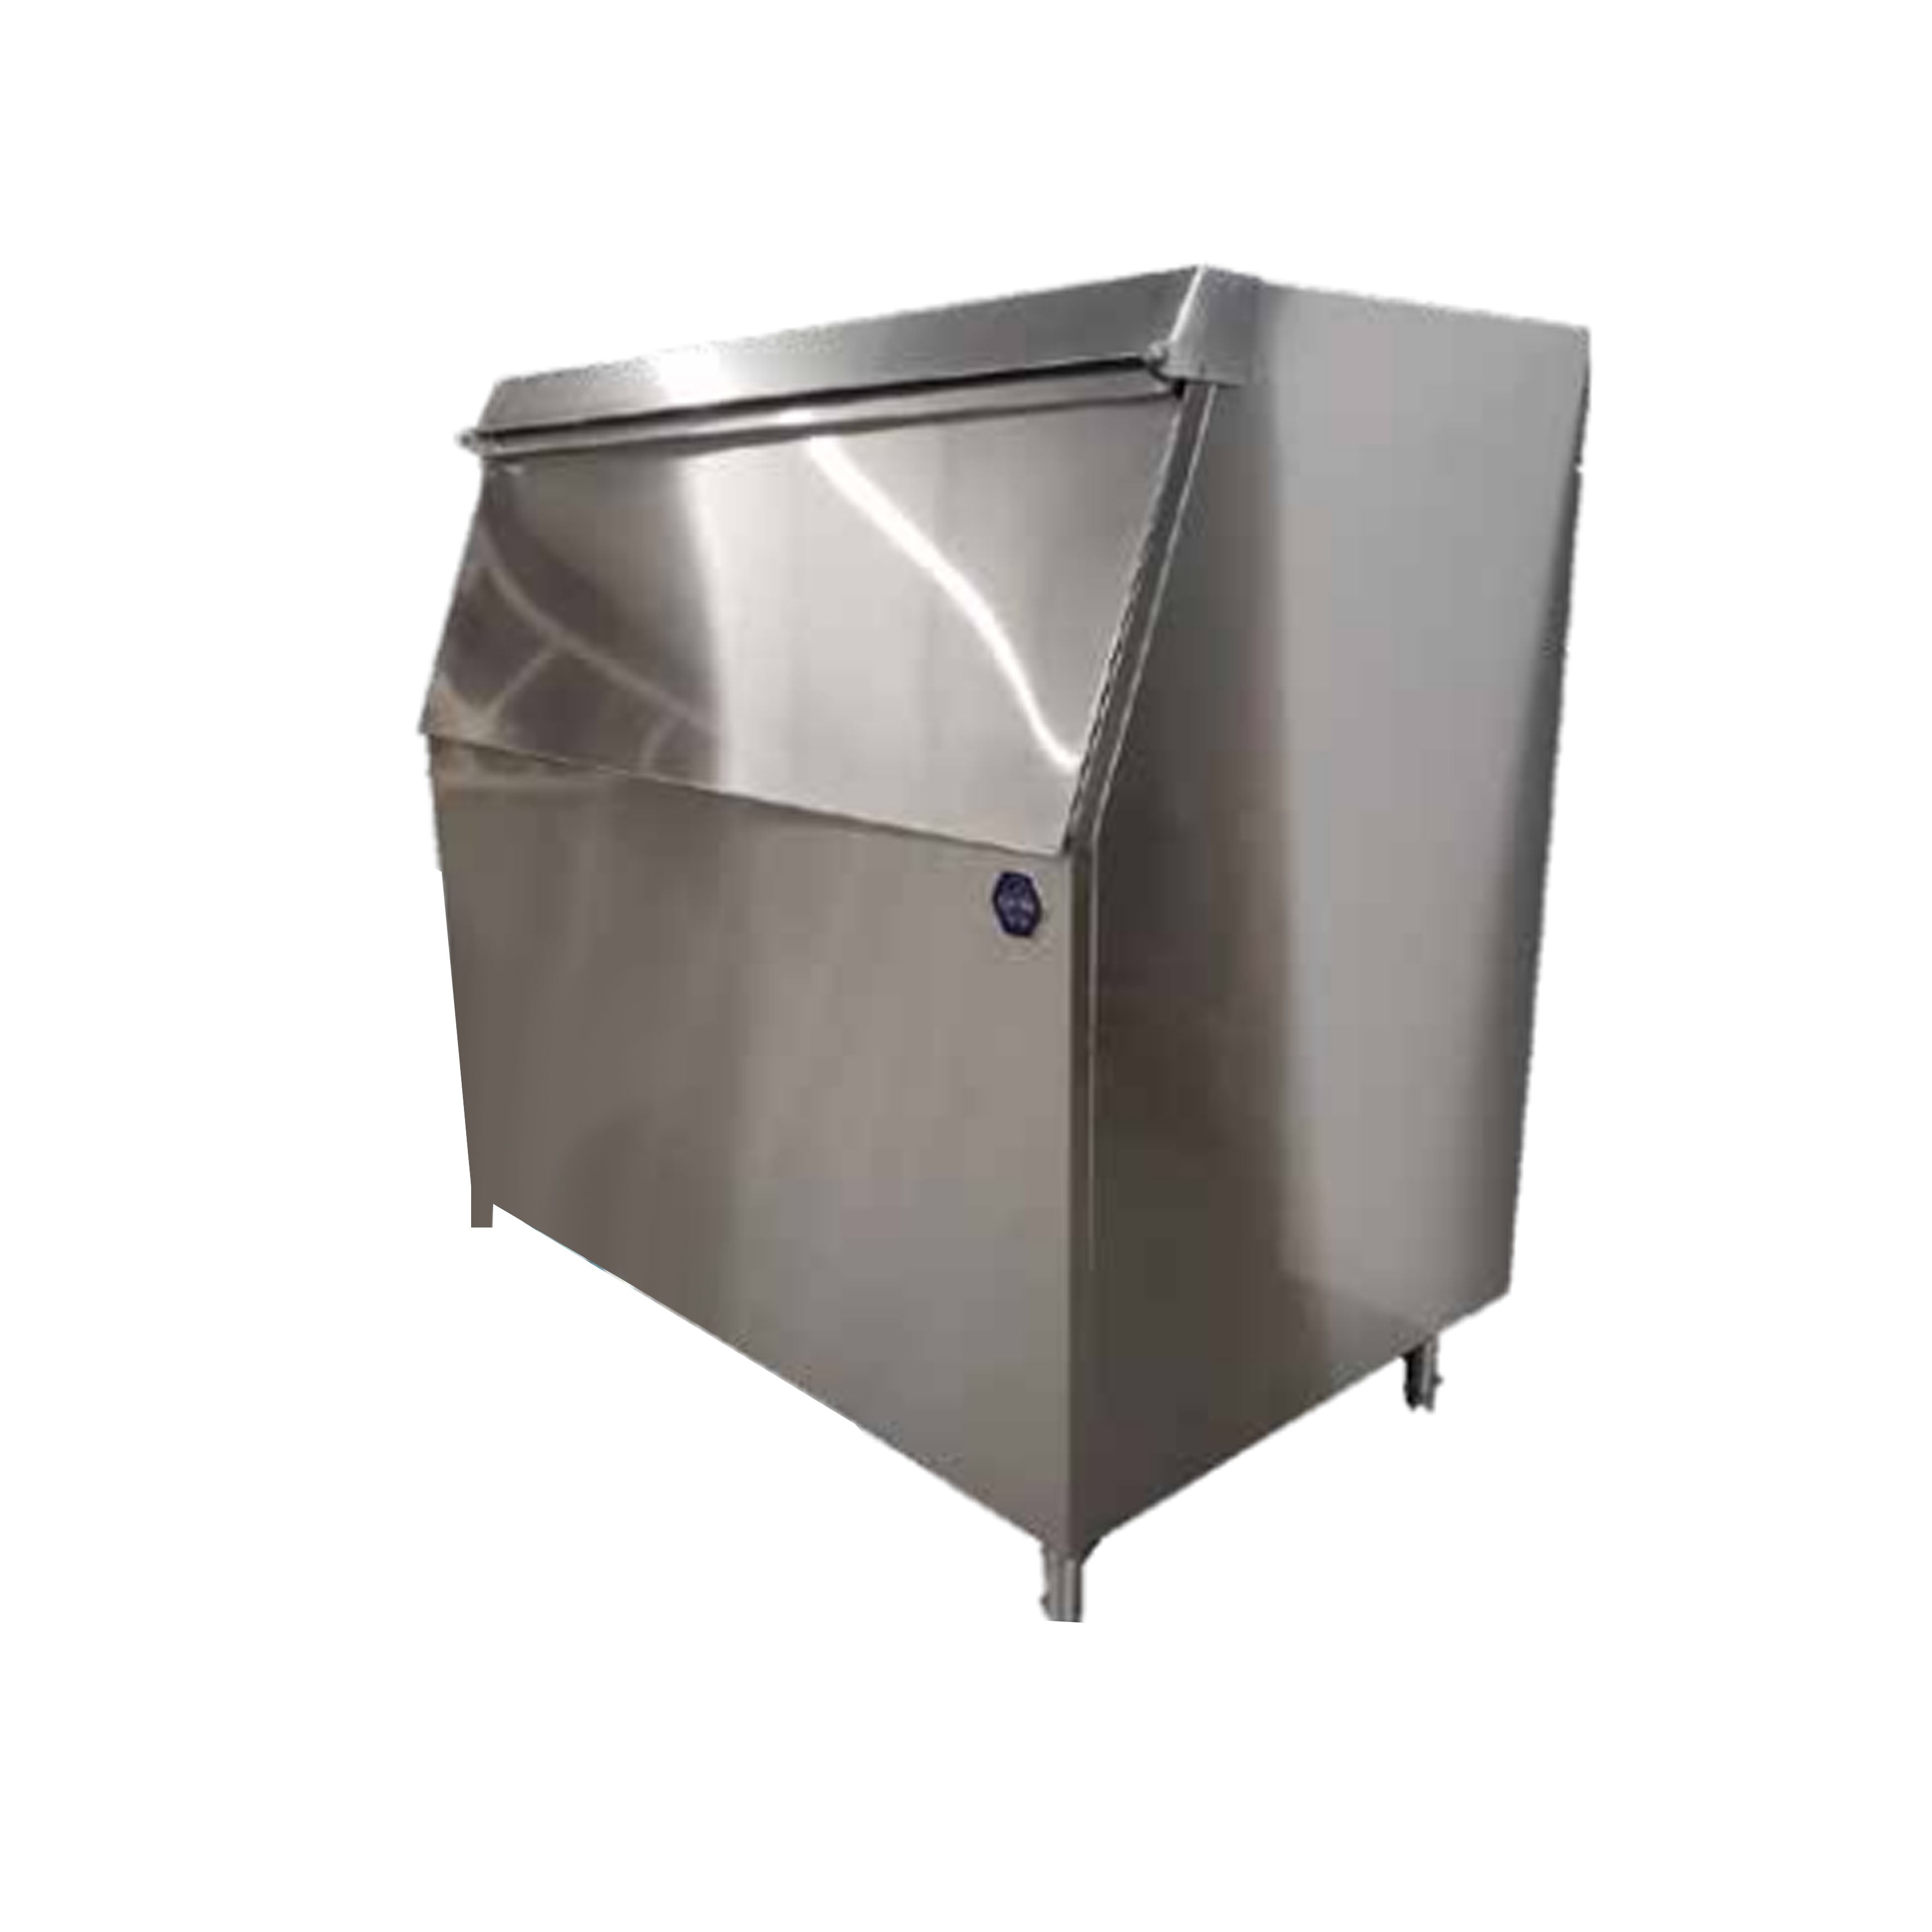 Icetro - IB-M900-48, Commercial 48" wide 900lbs Stainless steel Ice Bin